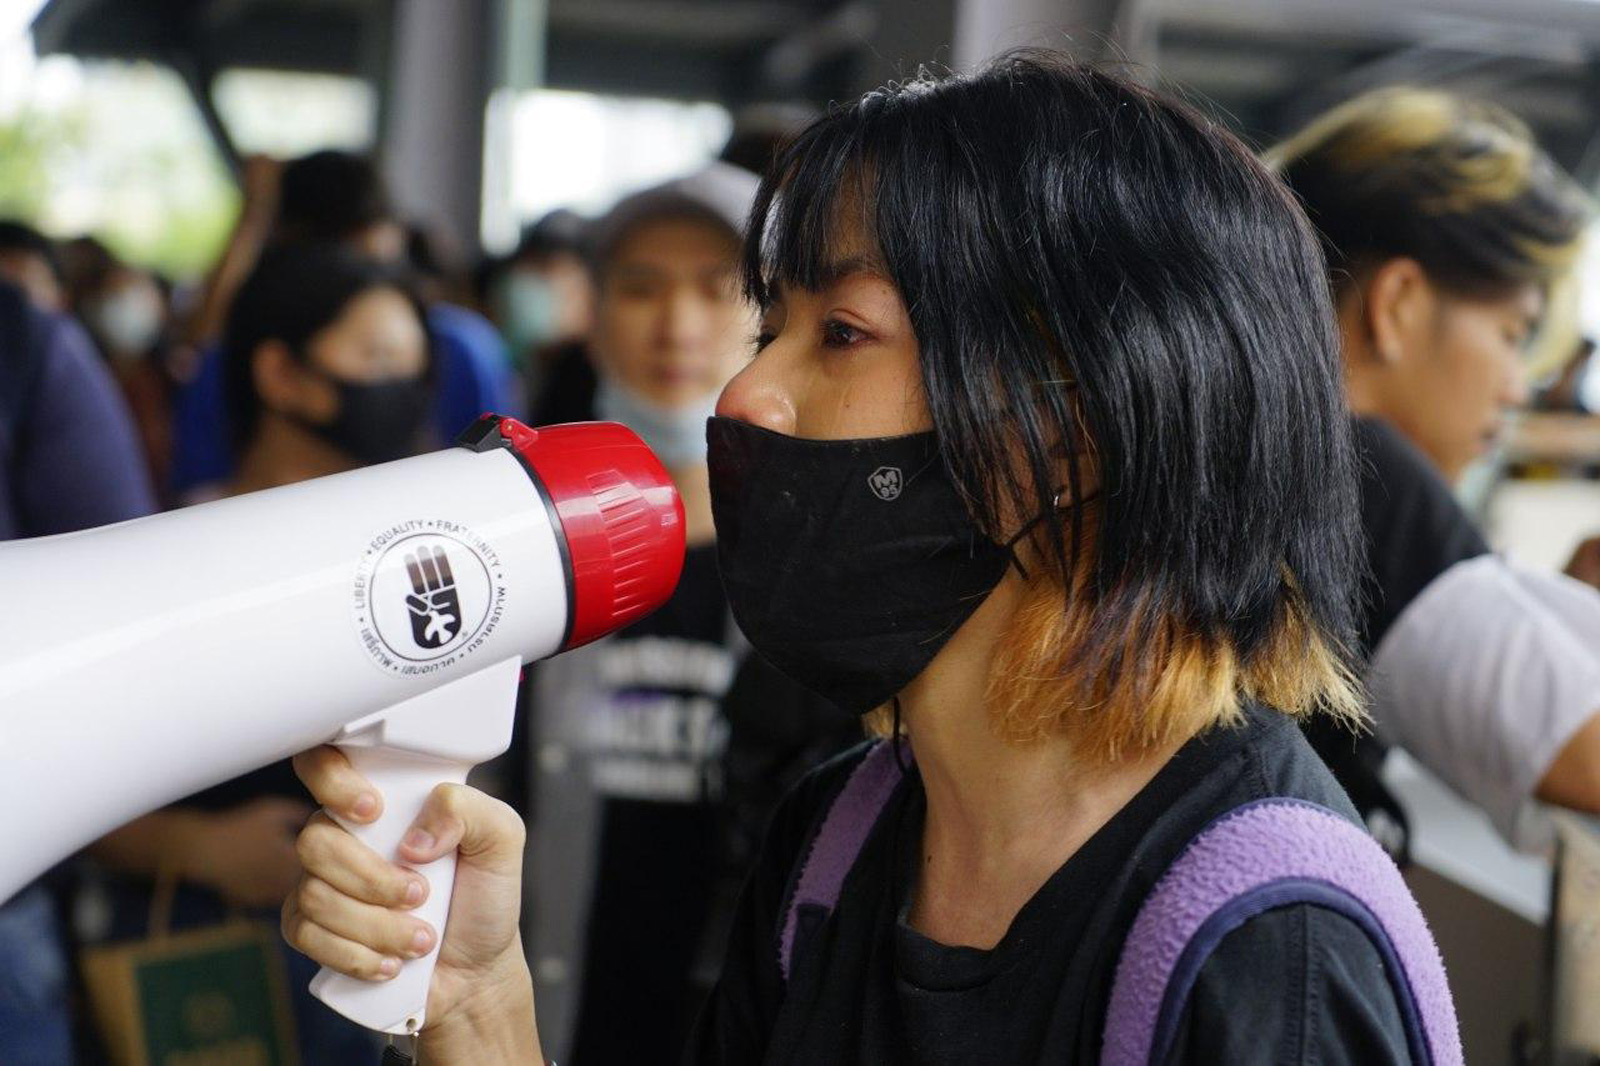 A protestor uses a megaphone during a flash mob at Lad Phrao intersection in Bangkok on 17 October 2020.